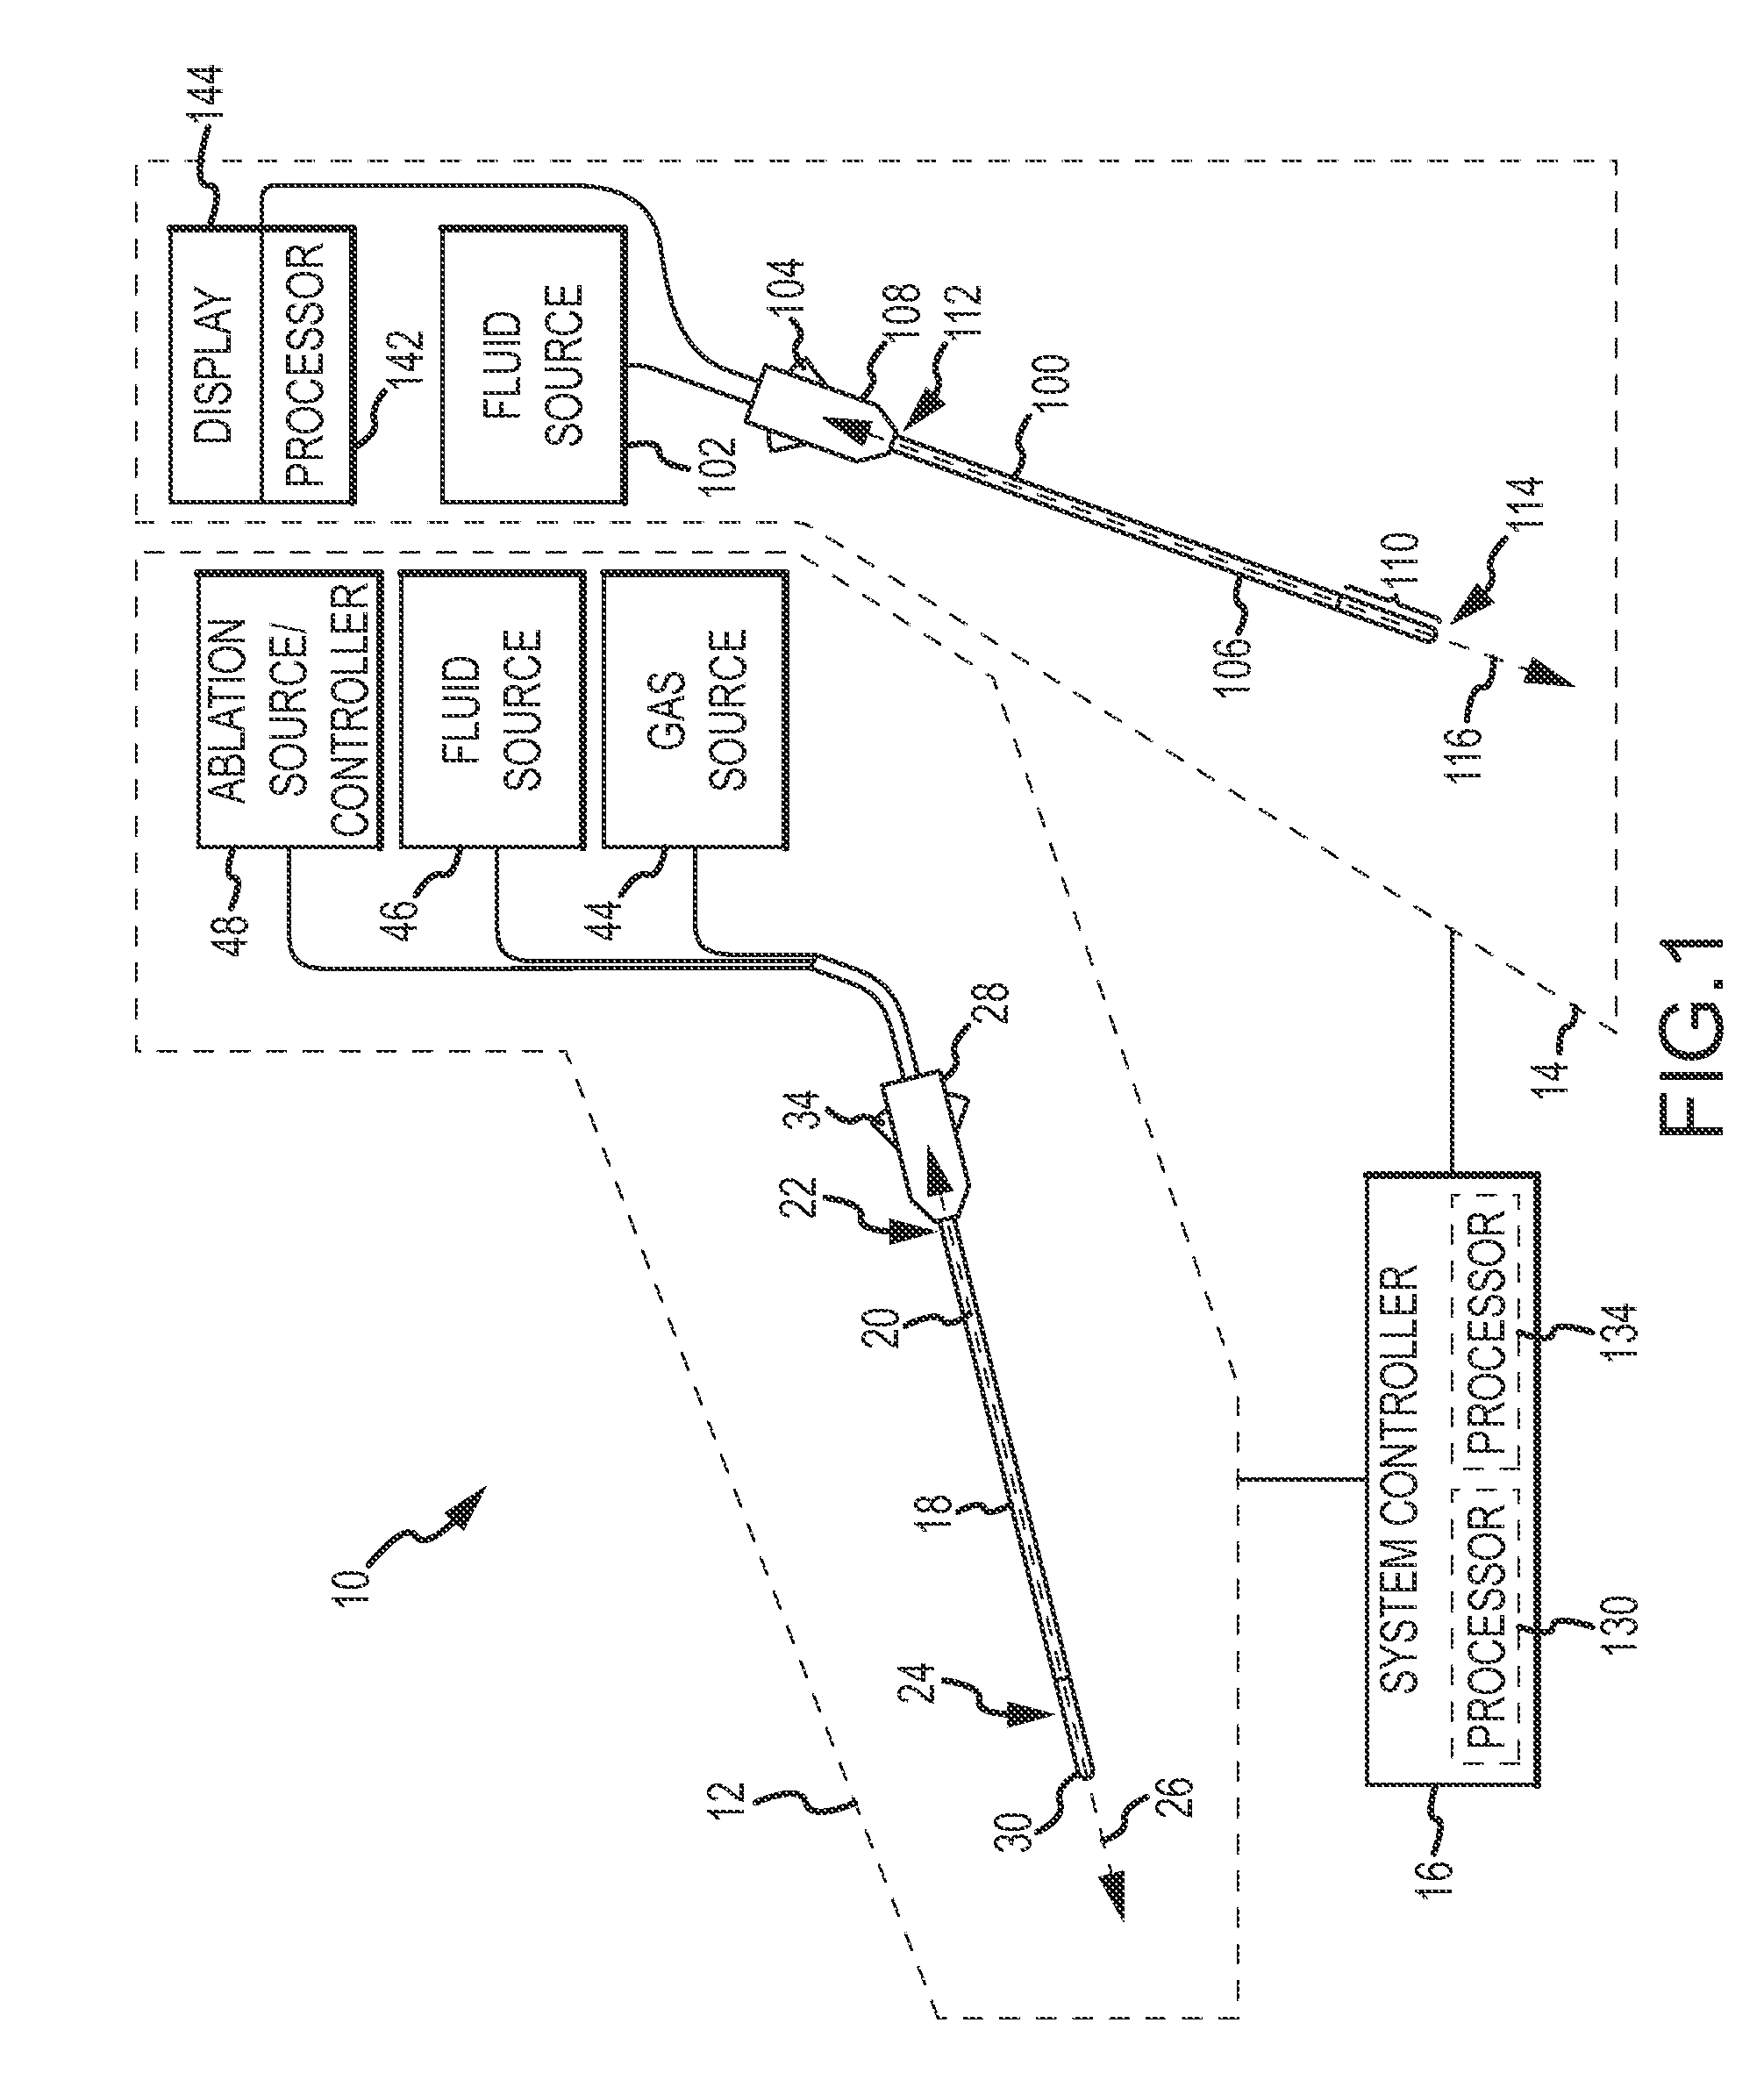 Ablation system with blood leakage minimization and tissue protective capabilities